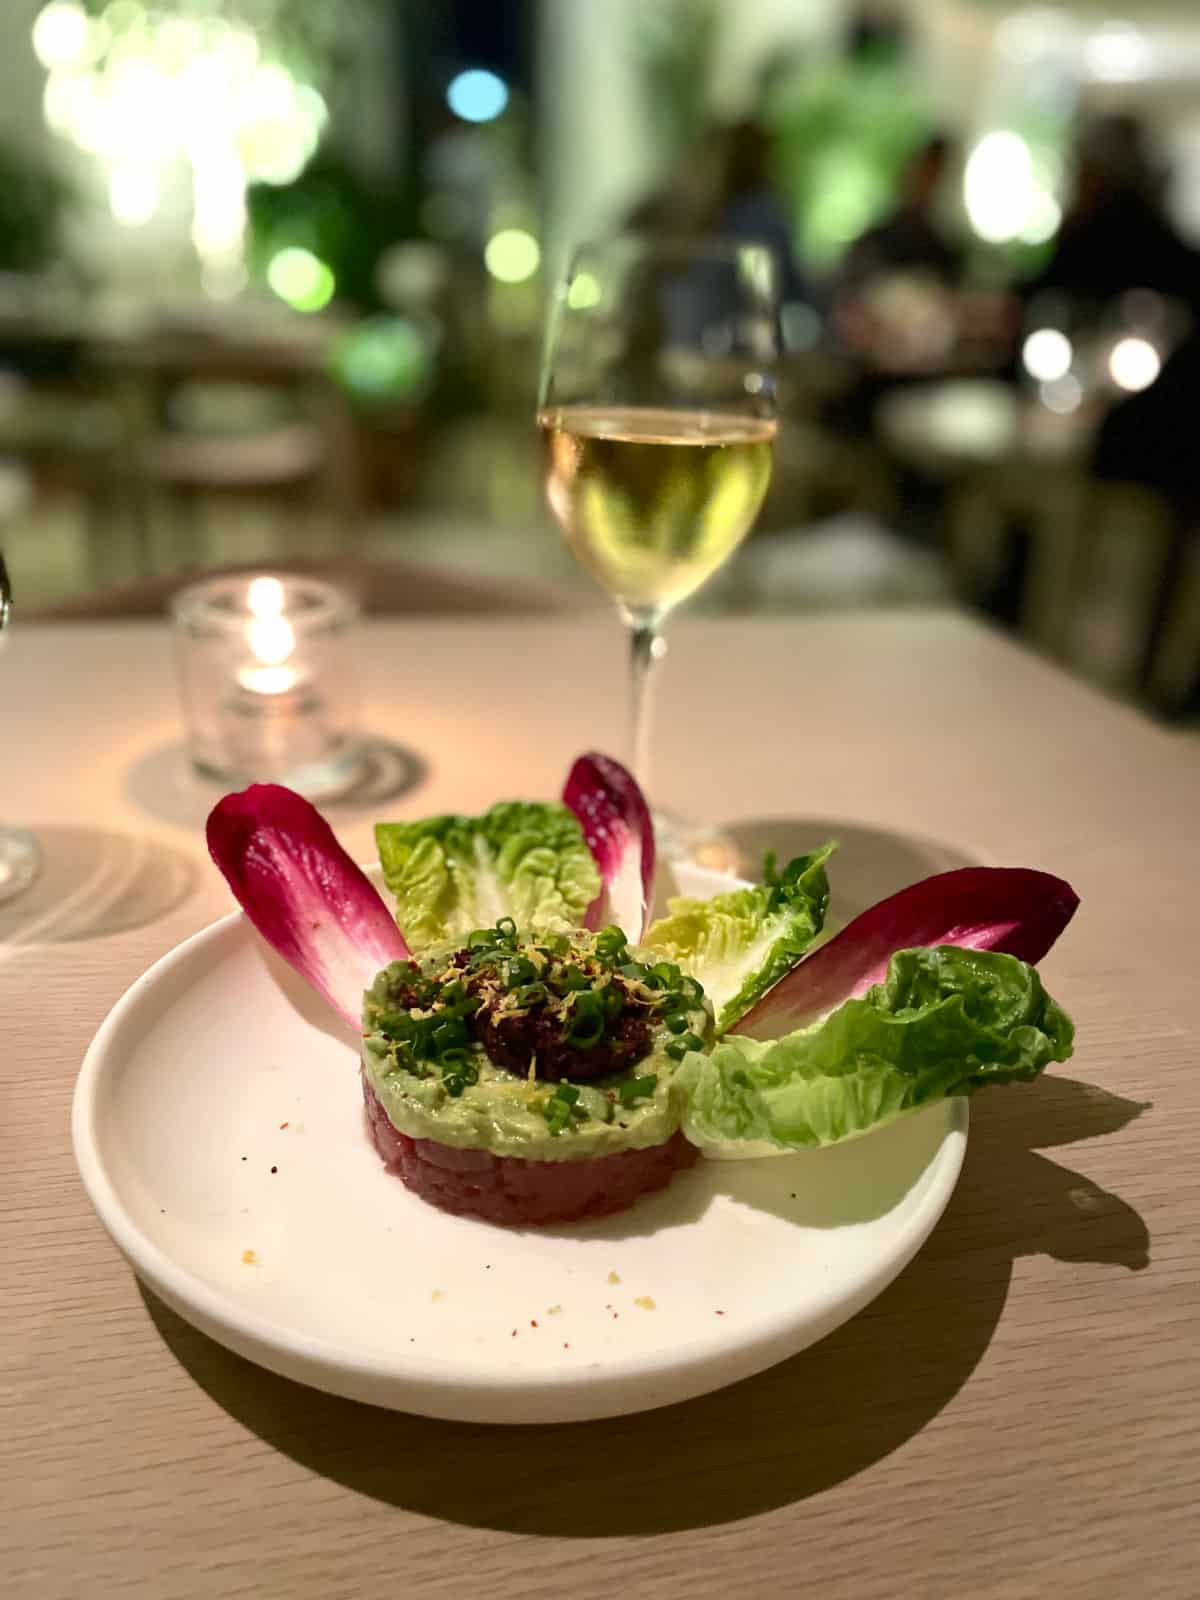 Tuna tartare with avocado and lettuce leaves with white wine in background.